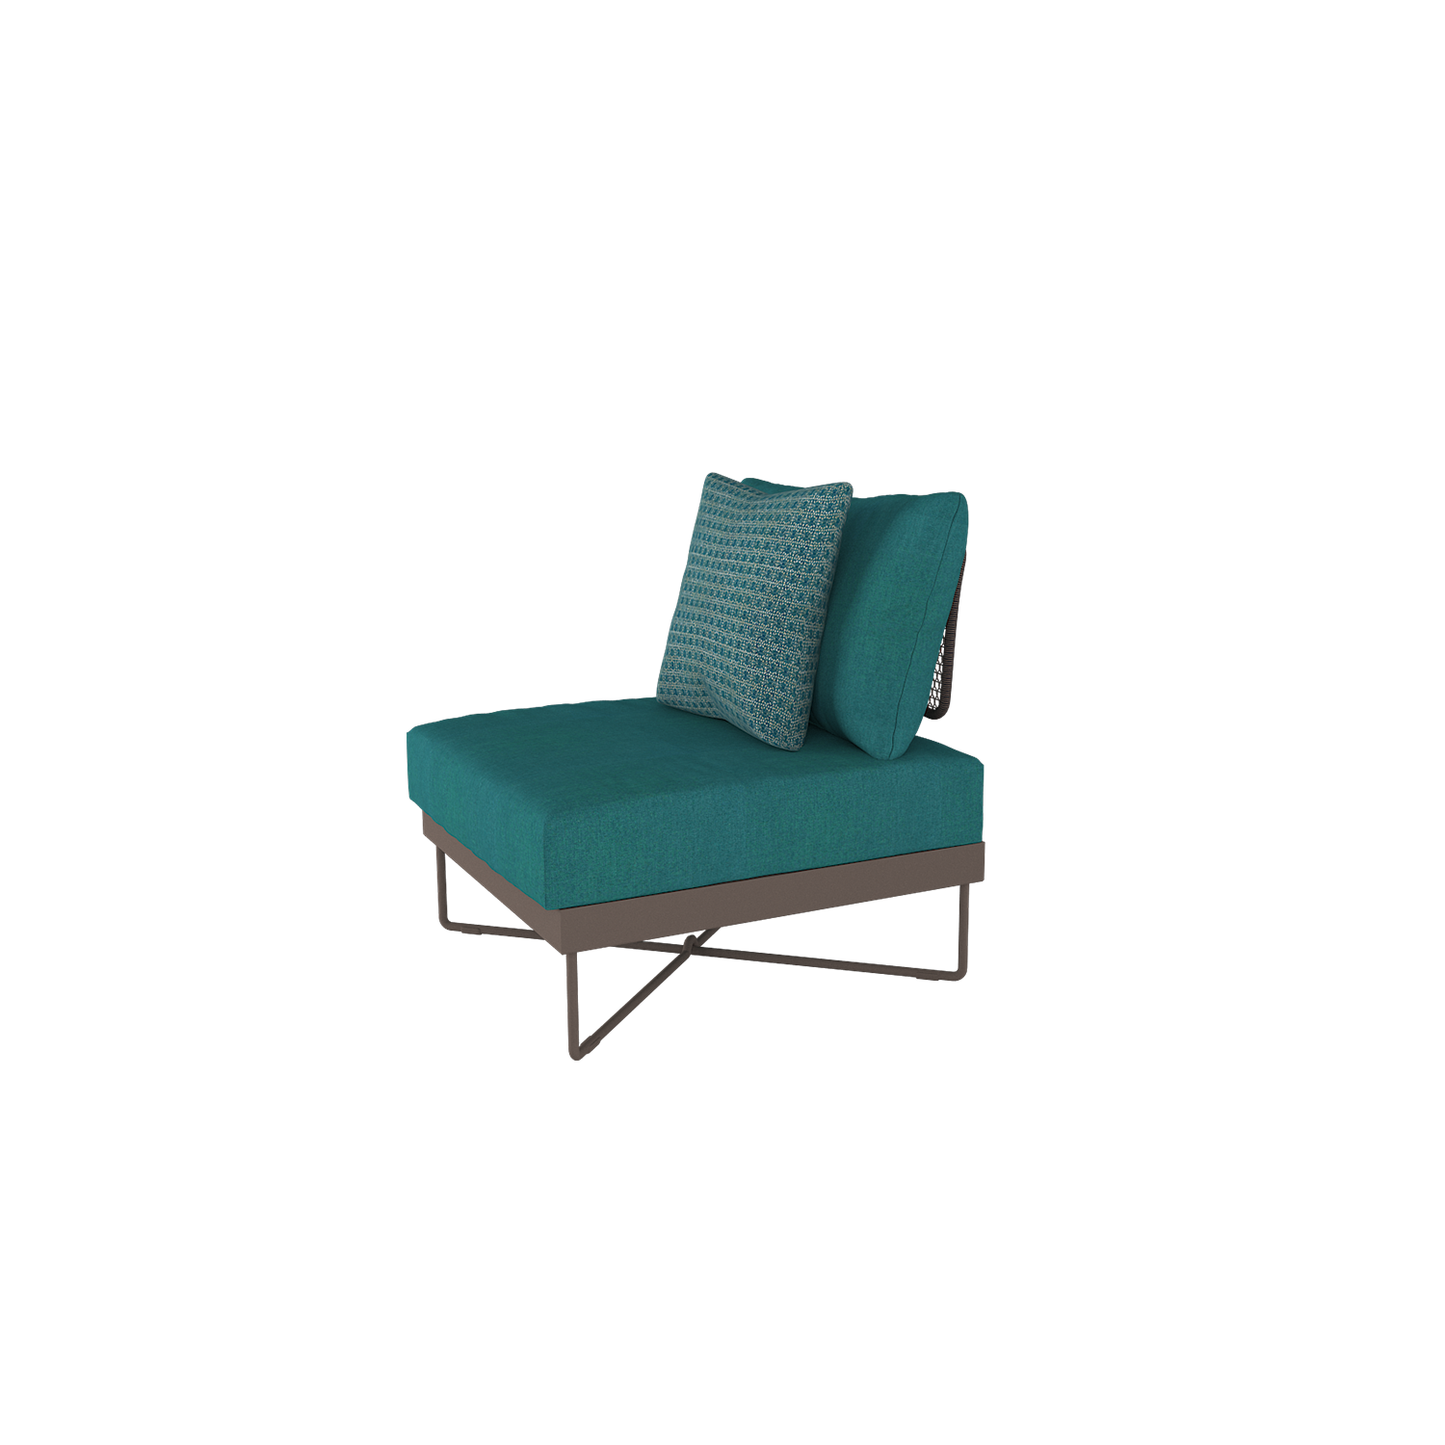 Coral Reef Lounge Chair with Sunloom Back | Roberti | Outdoor Lounge chairs | coral-reef-lounge-chair